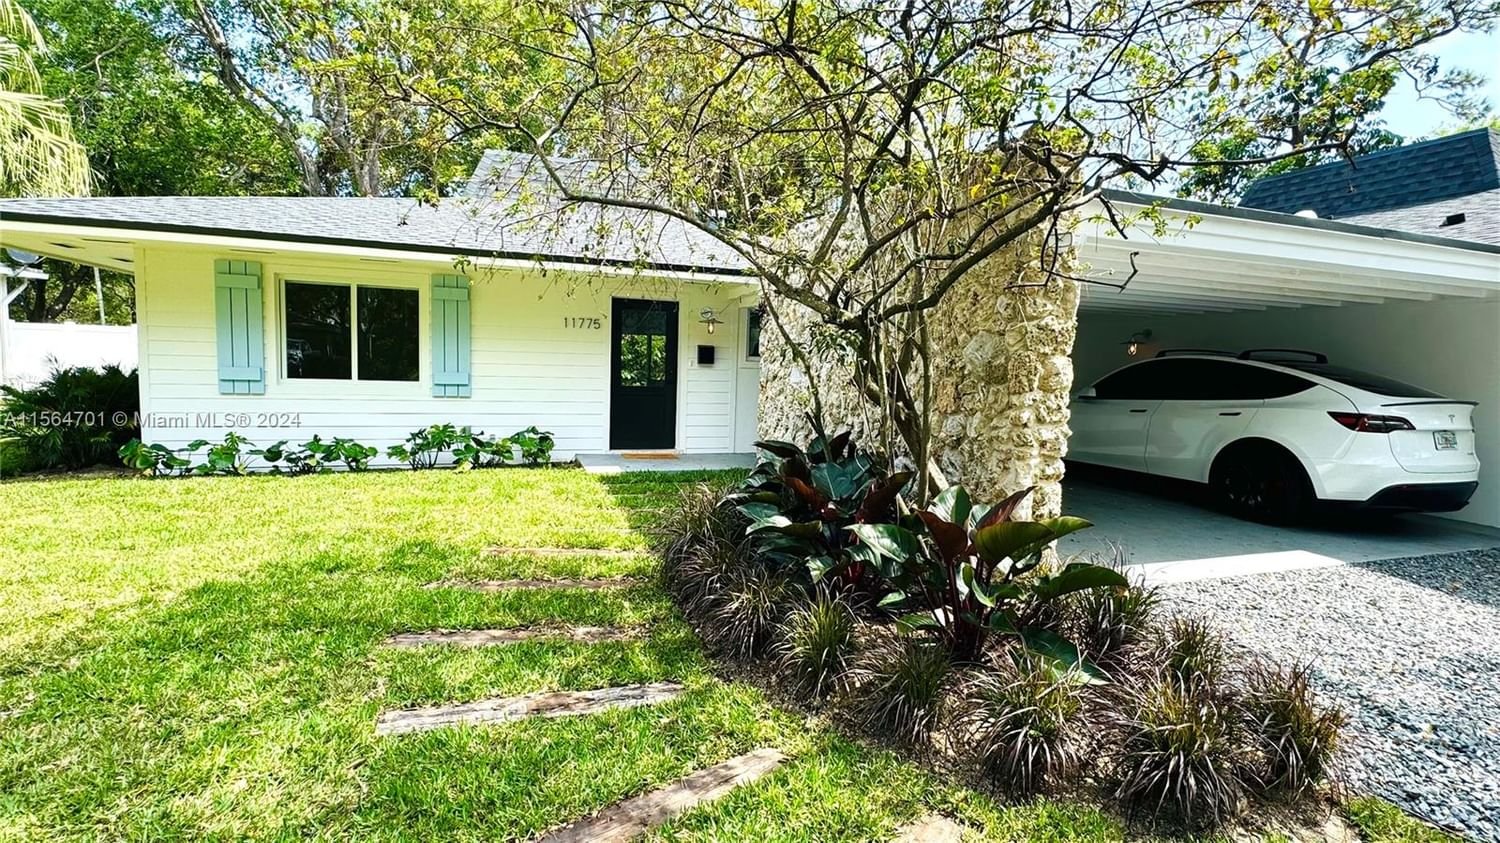 Real estate property located at 11775 81st Rd, Miami-Dade County, SUNILAND TERRACE, Pinecrest, FL